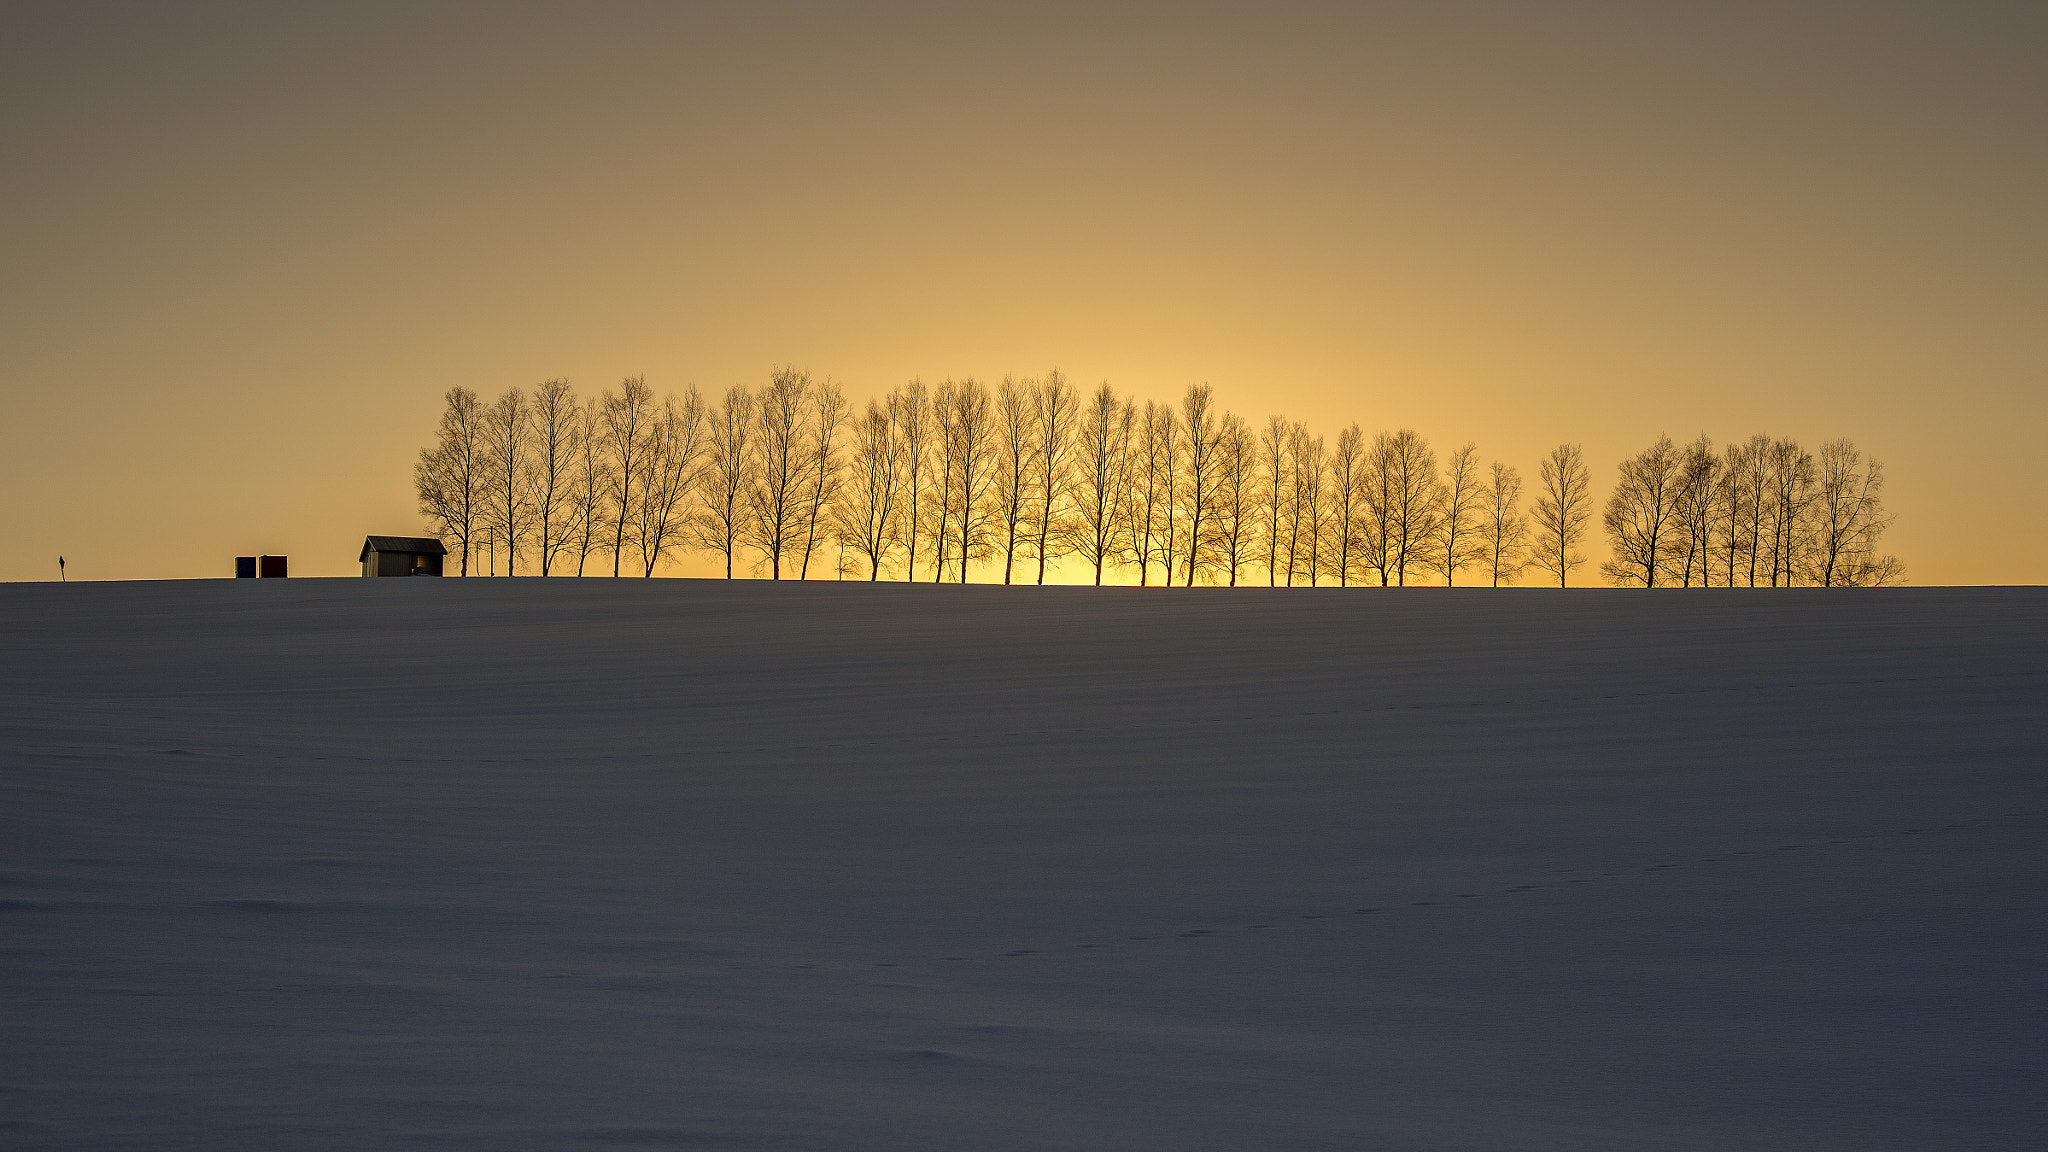 Nikon D5 sample photo. Forest in the winter with snow on the ground, biei hokkaido, jap photography